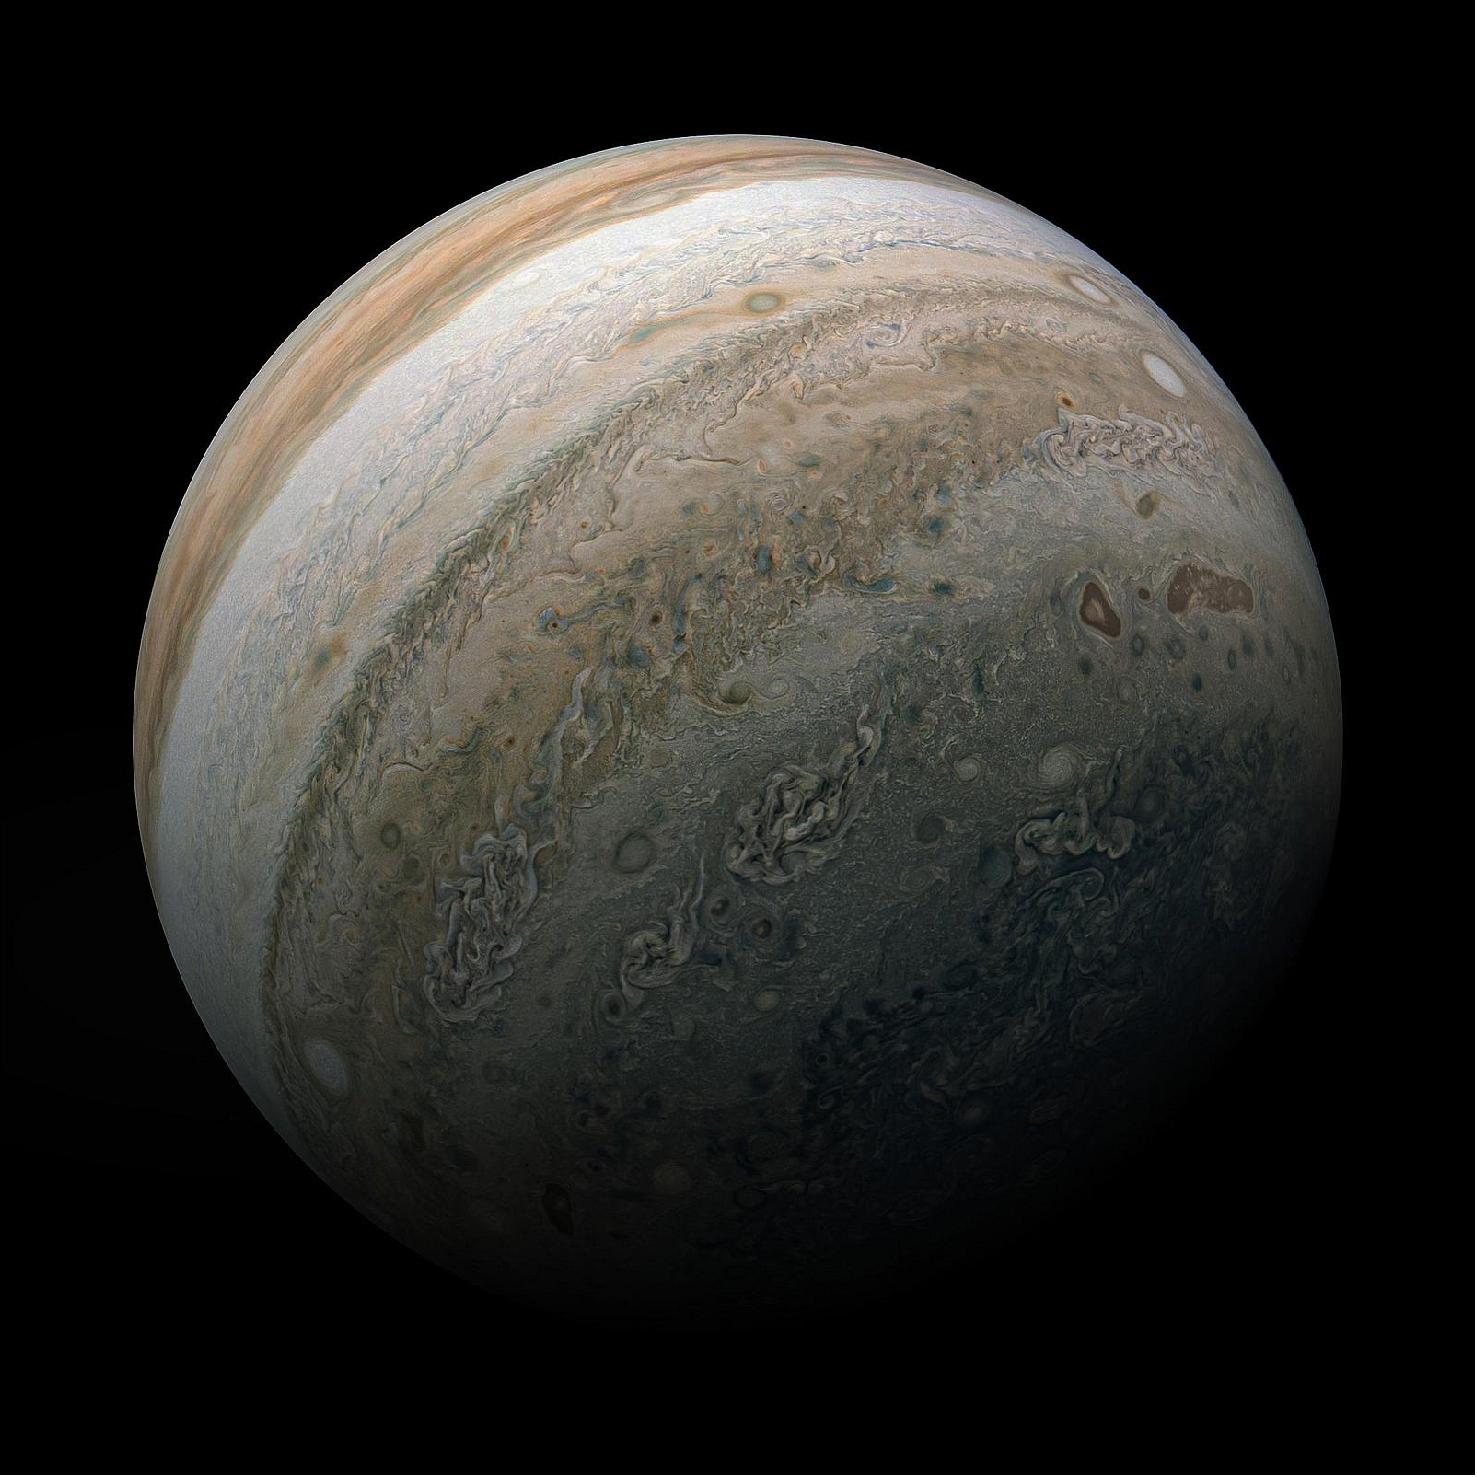 Figure 15: Jupiter's southern hemisphere is shown in this image from NASA's Juno mission. New observations by NASA's NuSTAR reveal that auroras near both the planet's poles emit high-energy X-rays, which are produced when accelerated particles collide with Jupiter's atmosphere (image credit: Enhanced image by Kevin M. Gill (CC-BY) based on images provided courtesy of NASA/JPL-Caltech/SwRI/MSSS)